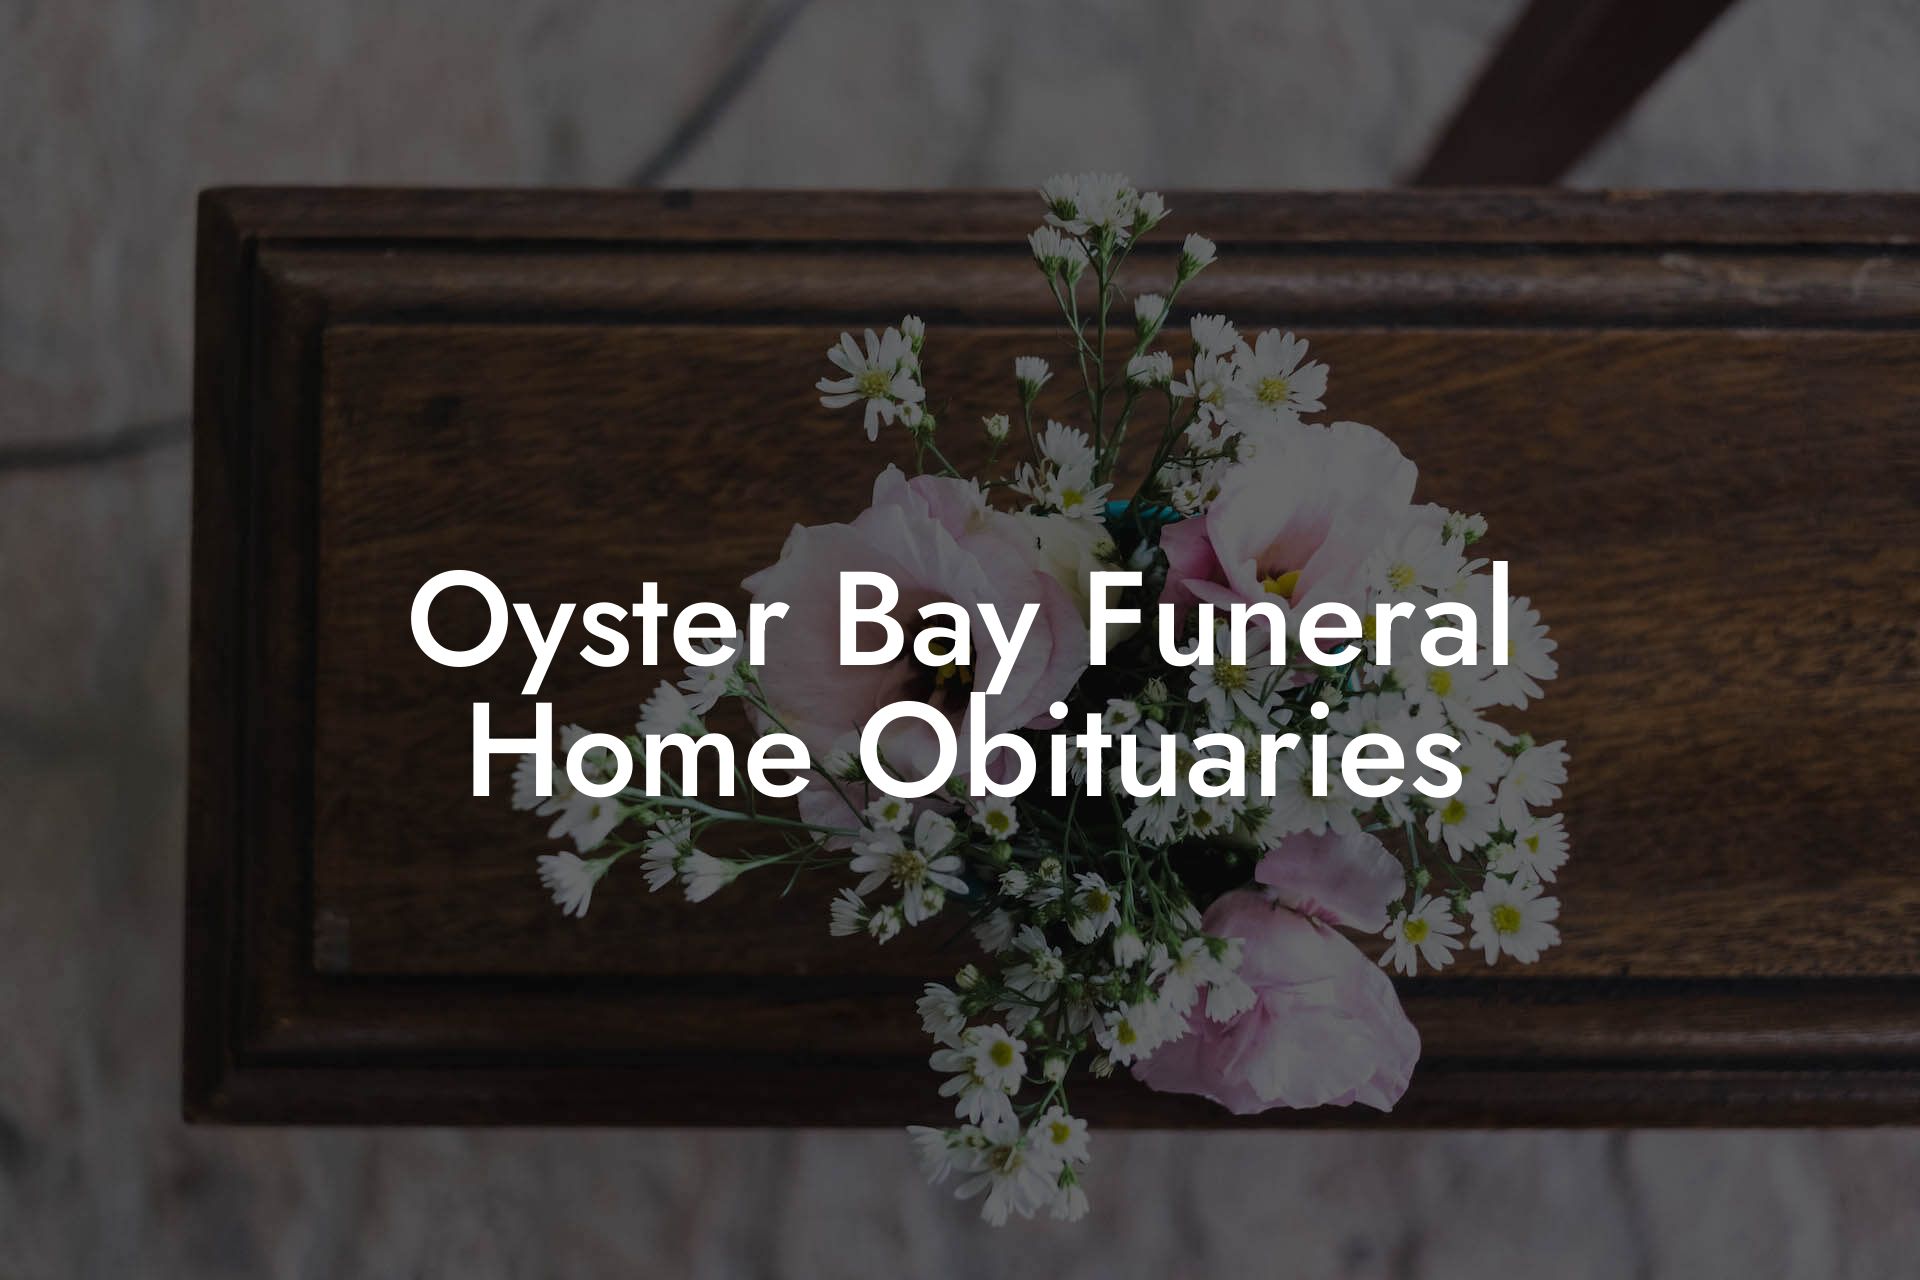 Oyster Bay Funeral Home Obituaries